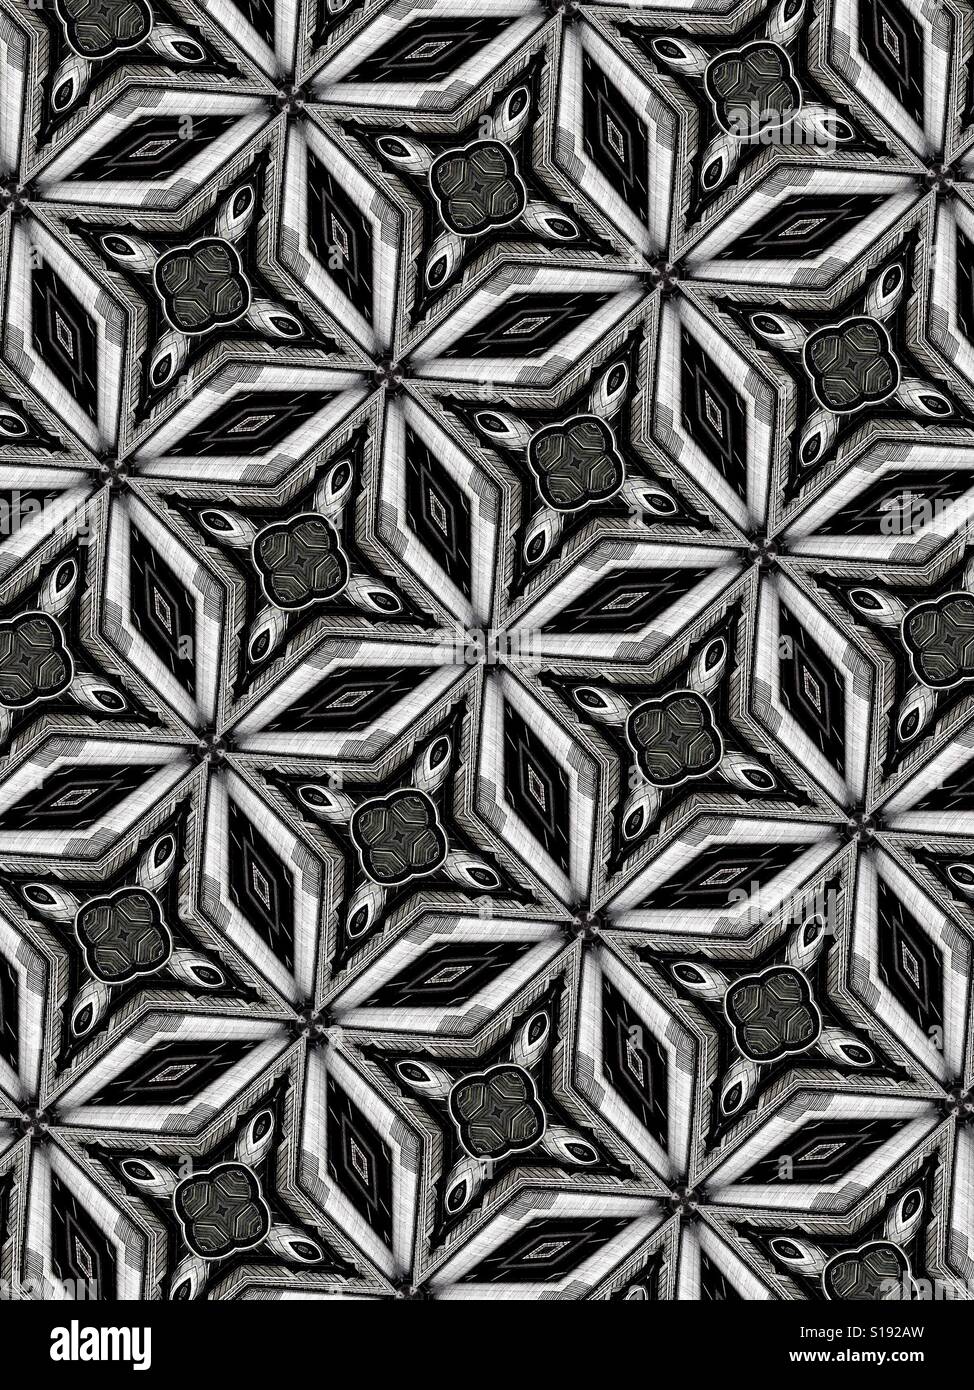 An abstract black and white pattern of intersecting star designs Stock Photo